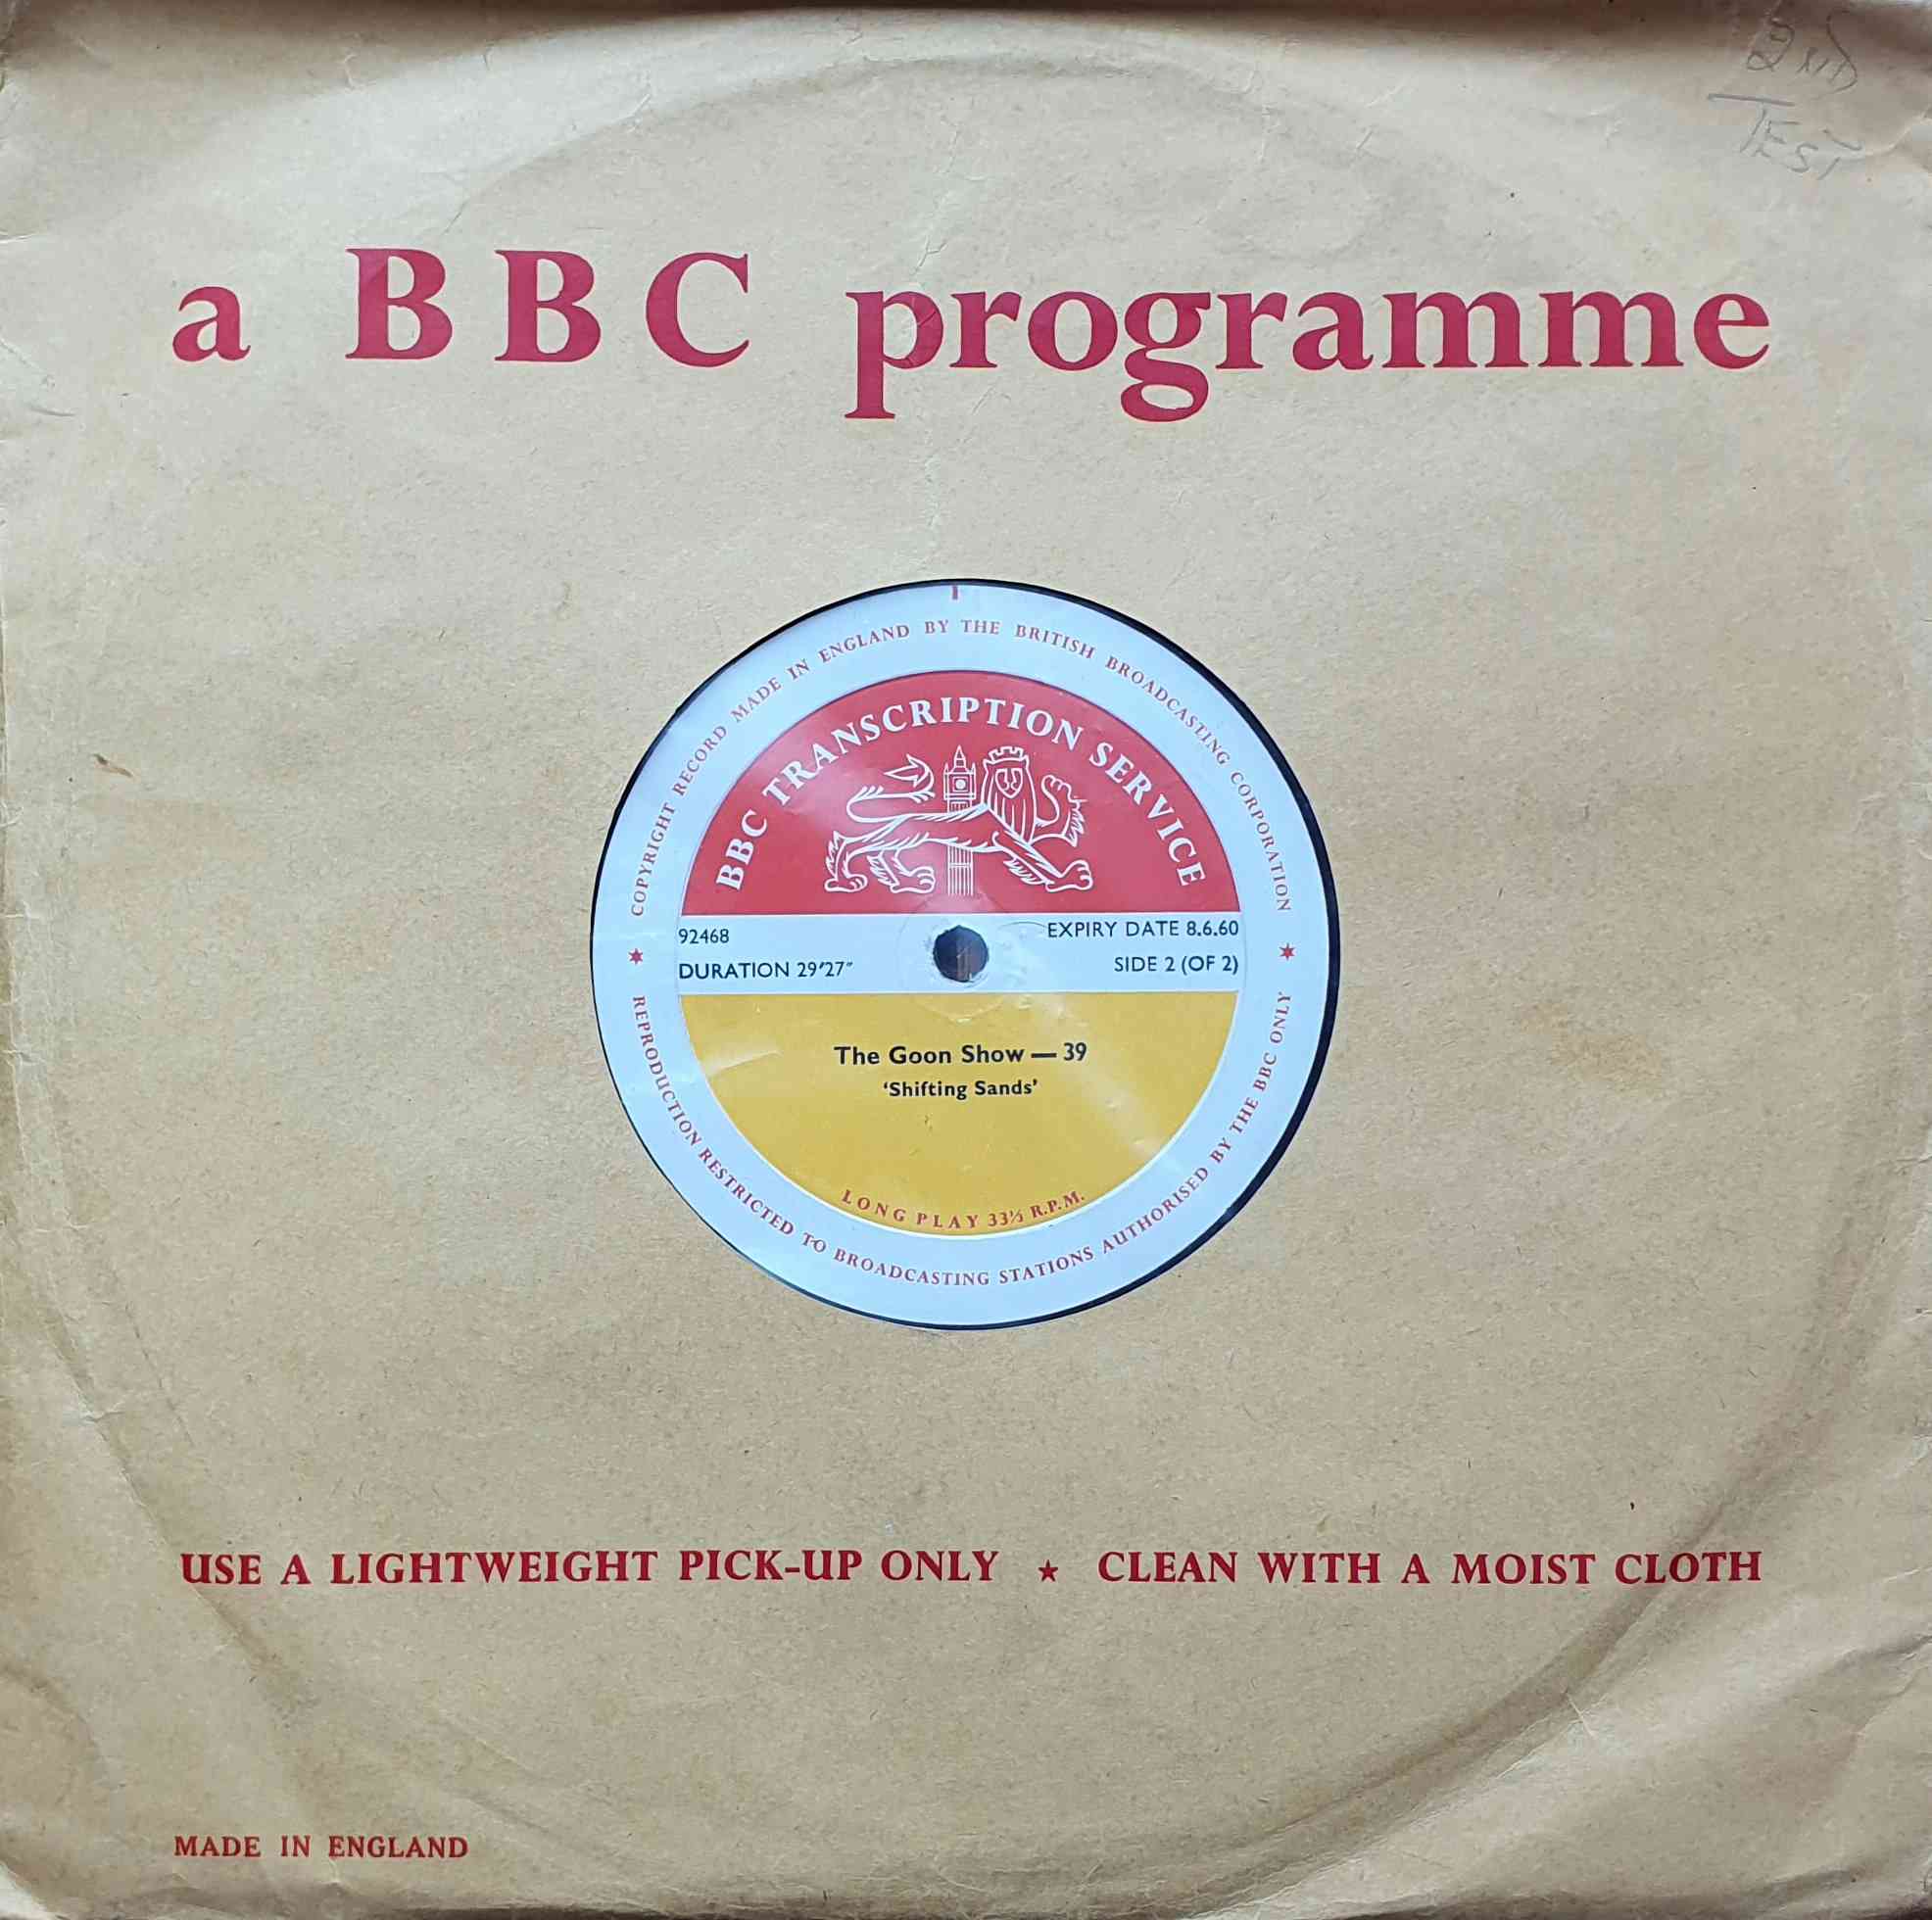 Picture of 92468 The Goon Show - 39 / 40 (Side 2 of 2) by artist Unknown from the BBC 10inches - Records and Tapes library